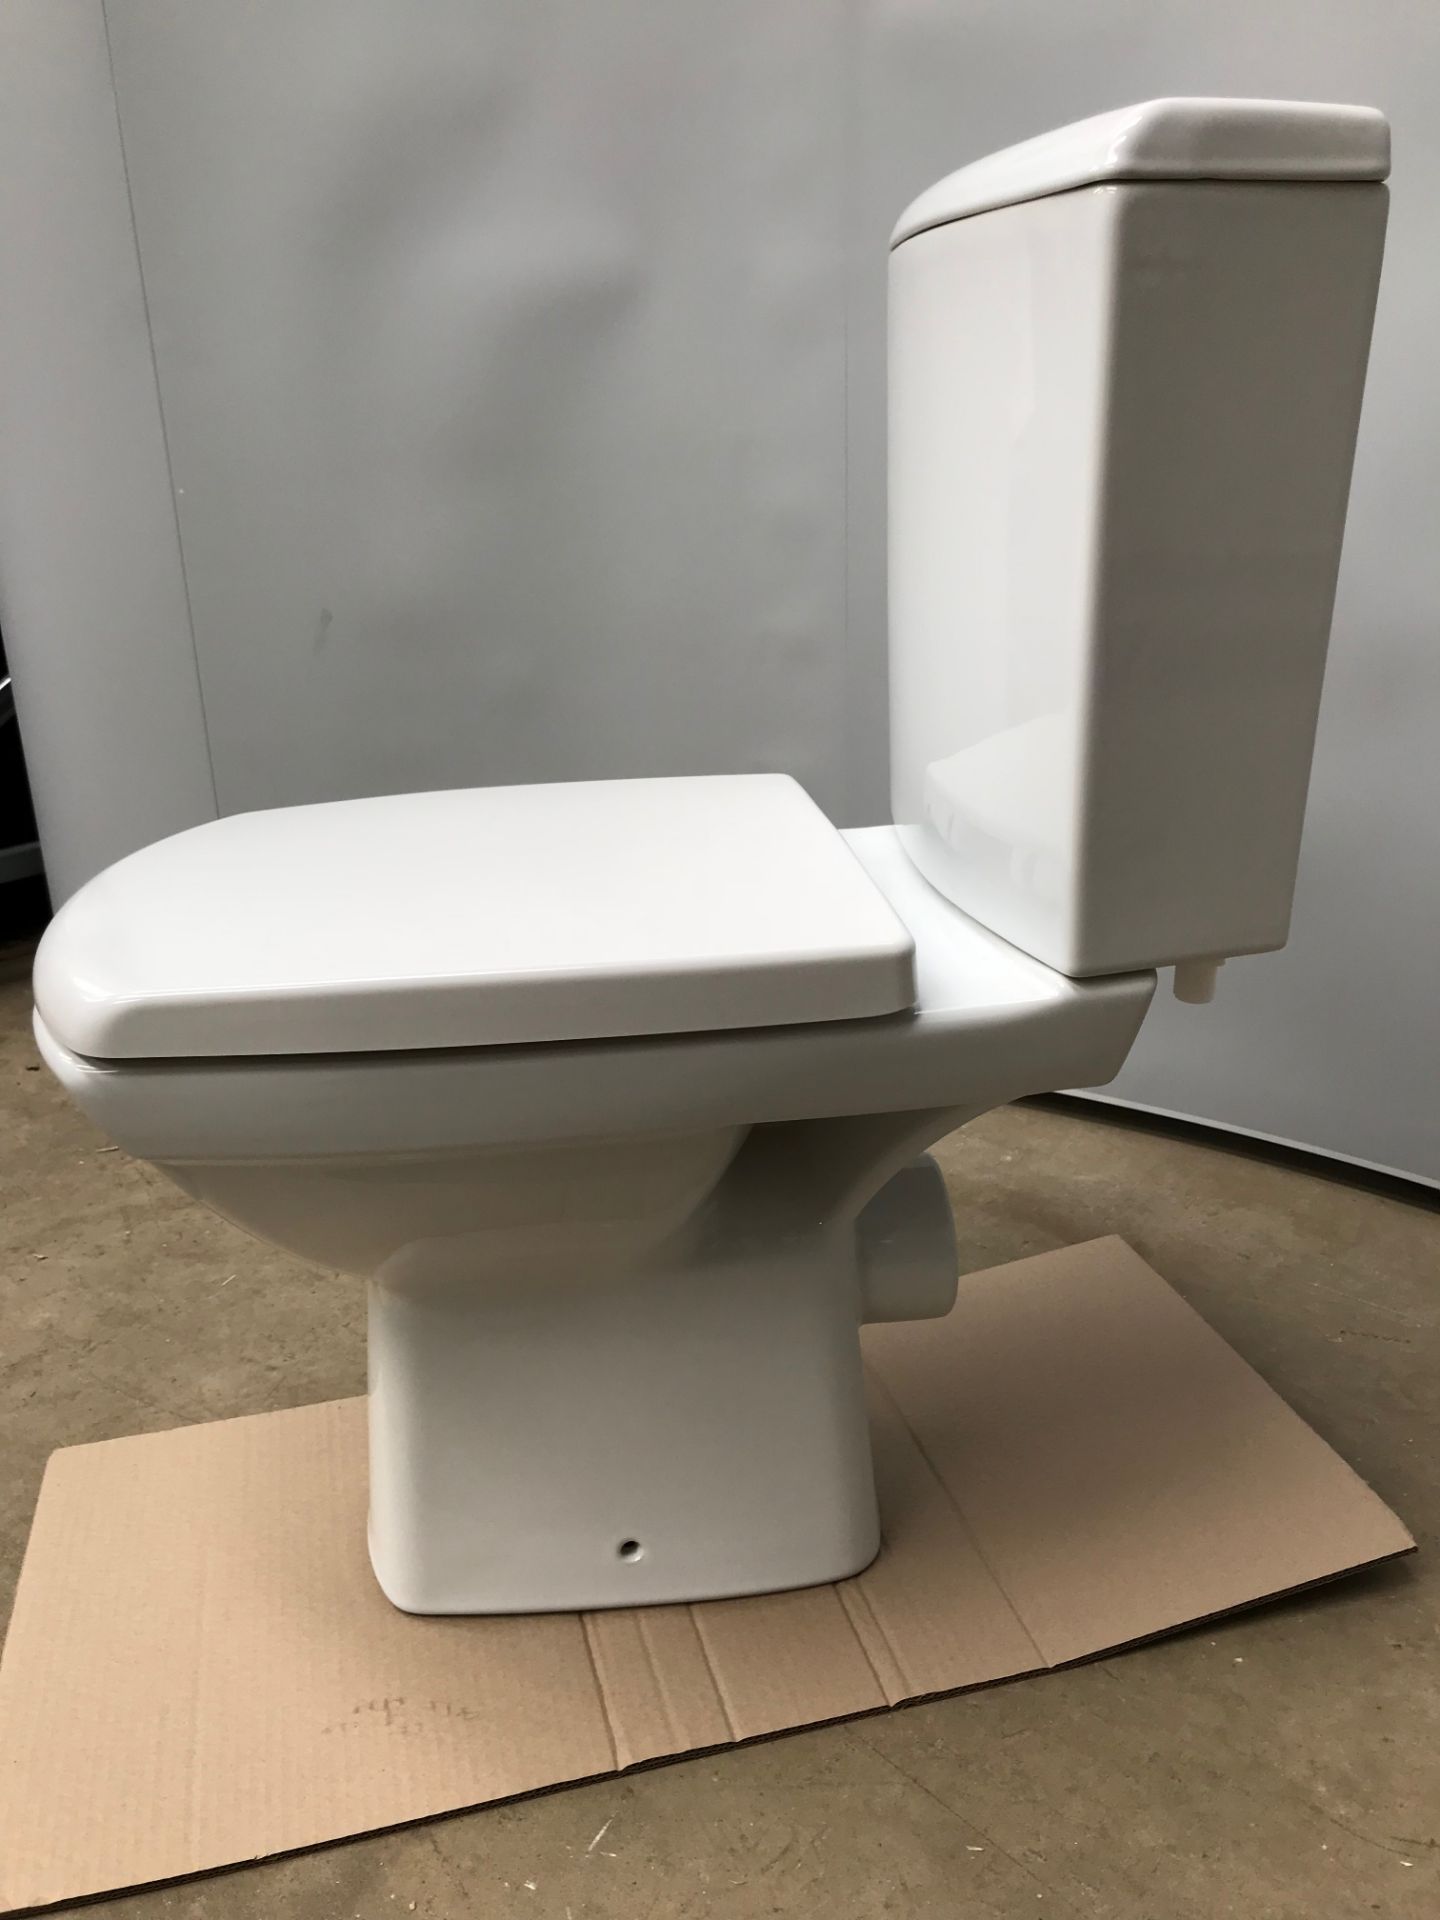 1 x Navassa Close Coupled Toilet with Soft Closing Seat - Image 3 of 7